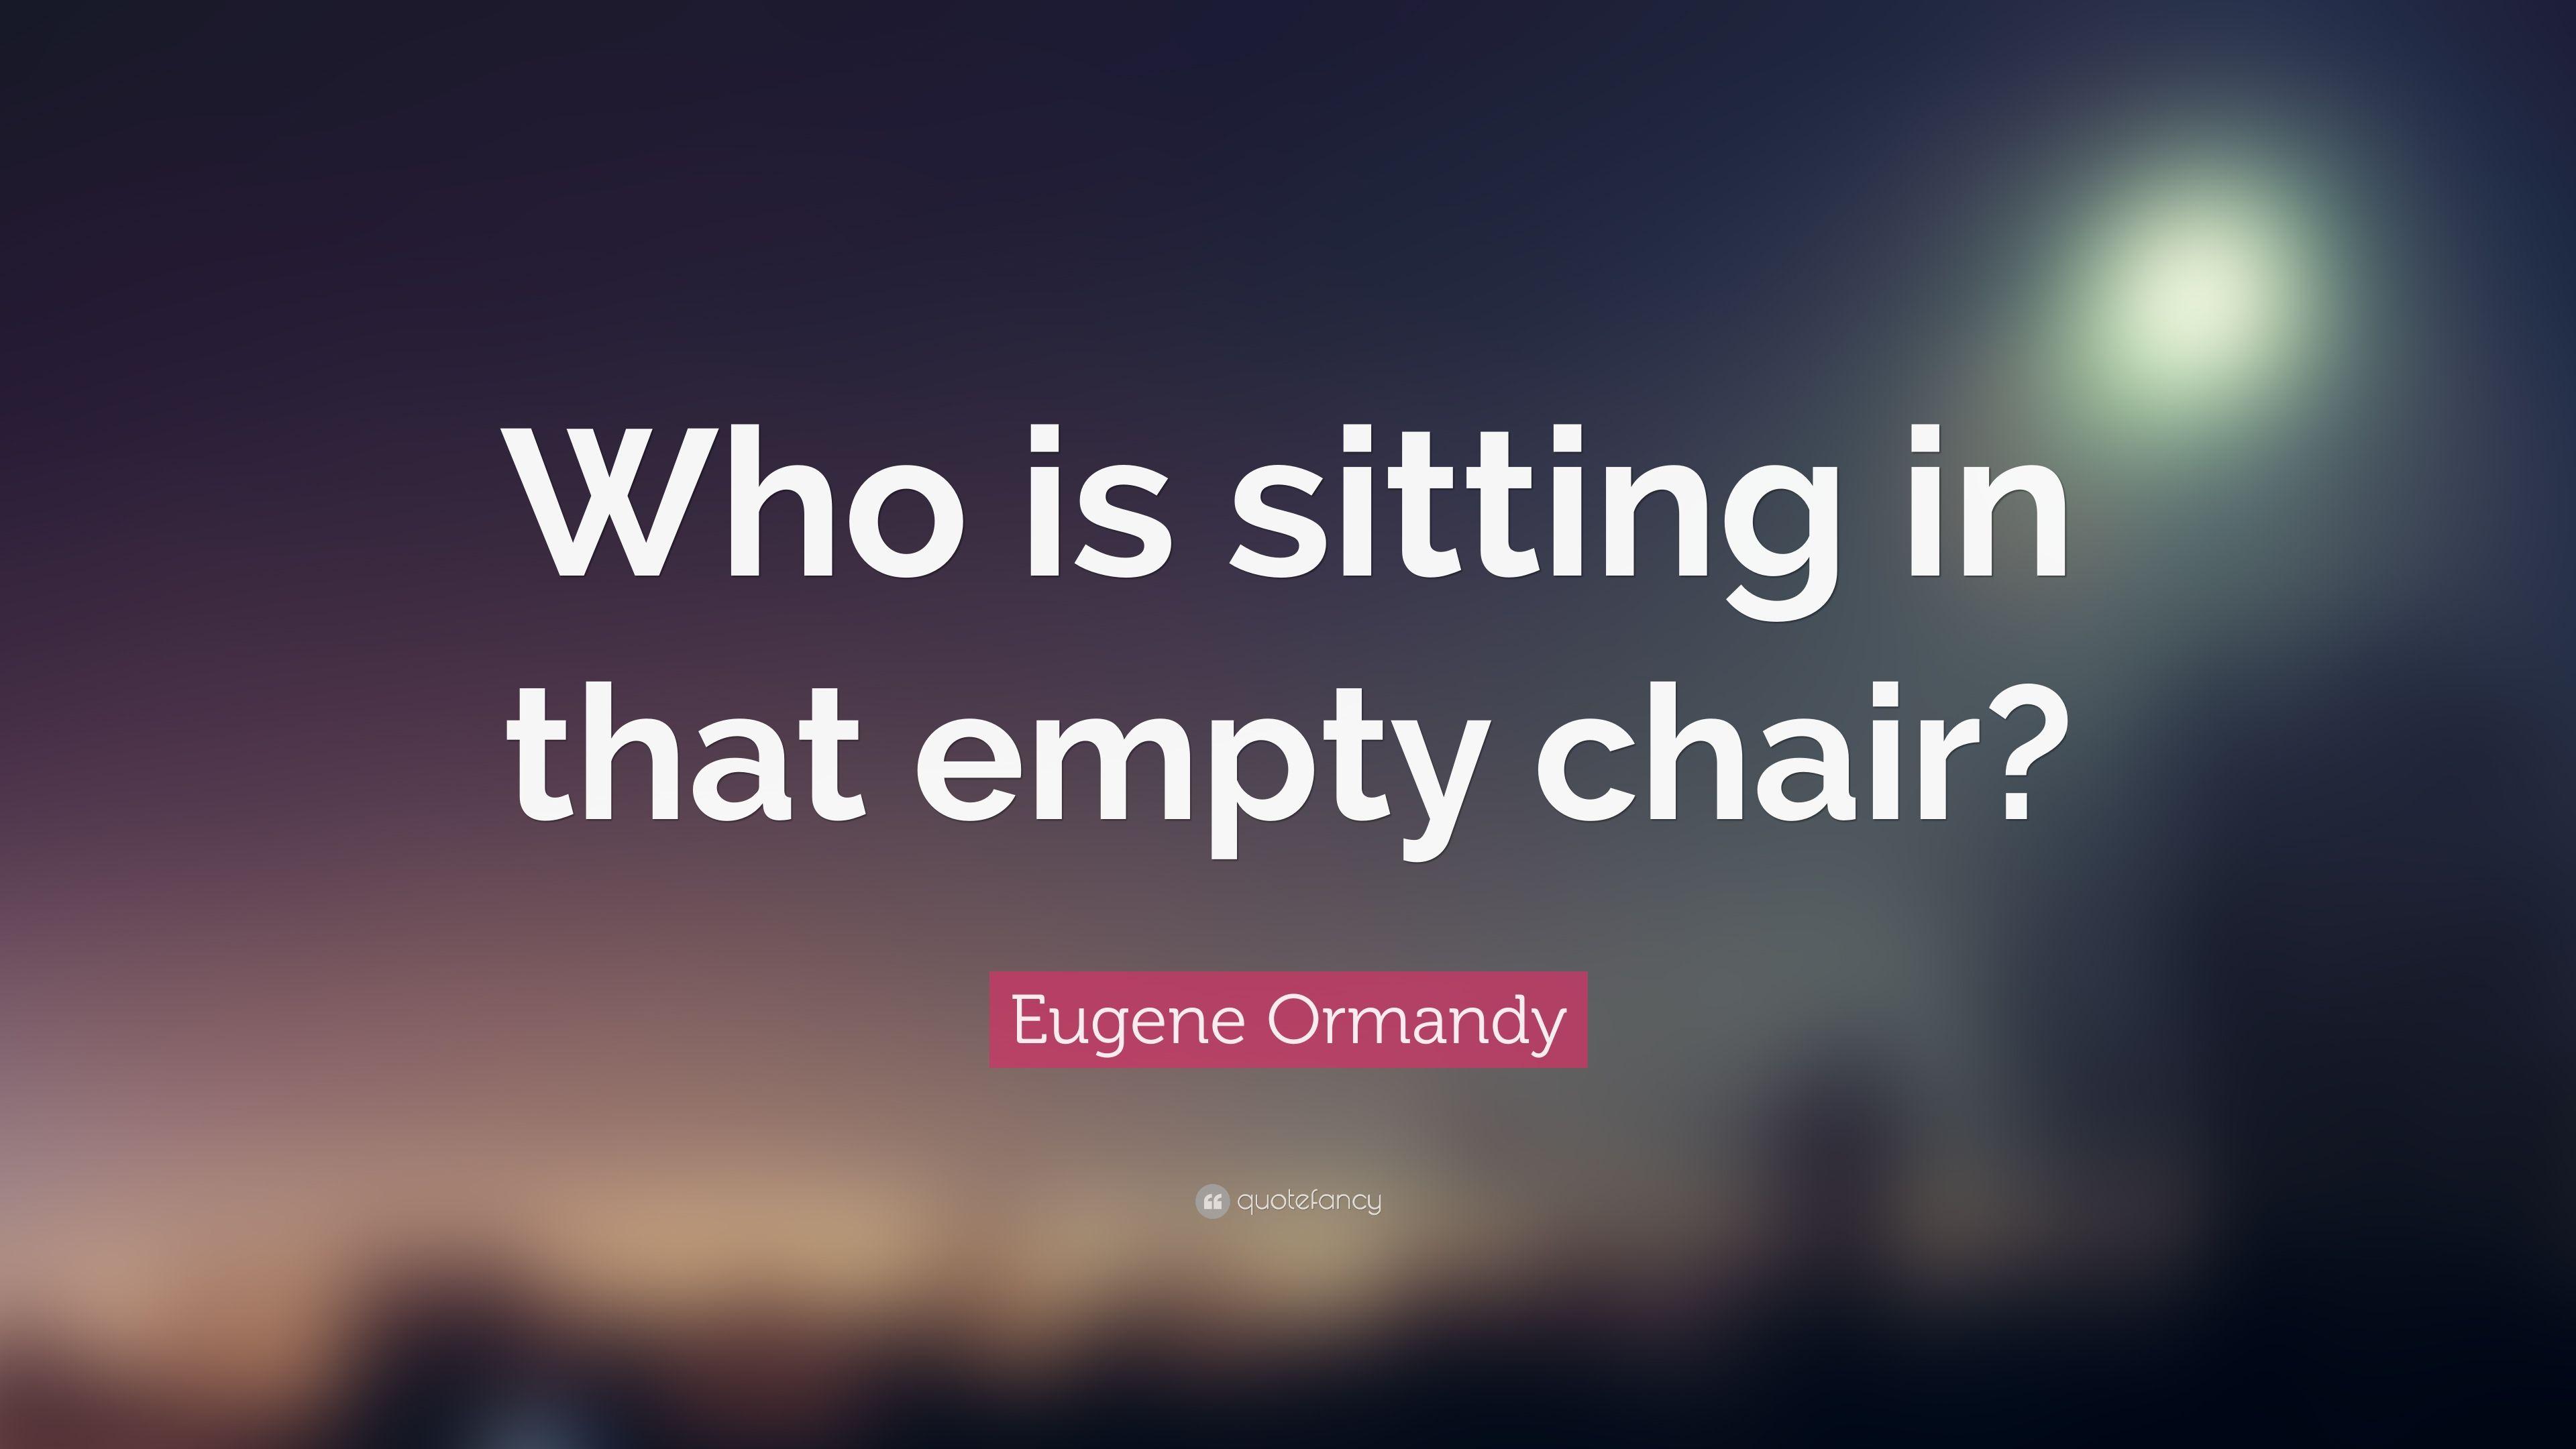 Eugene Ormandy Quote: “Who is sitting in that empty chair?” 7